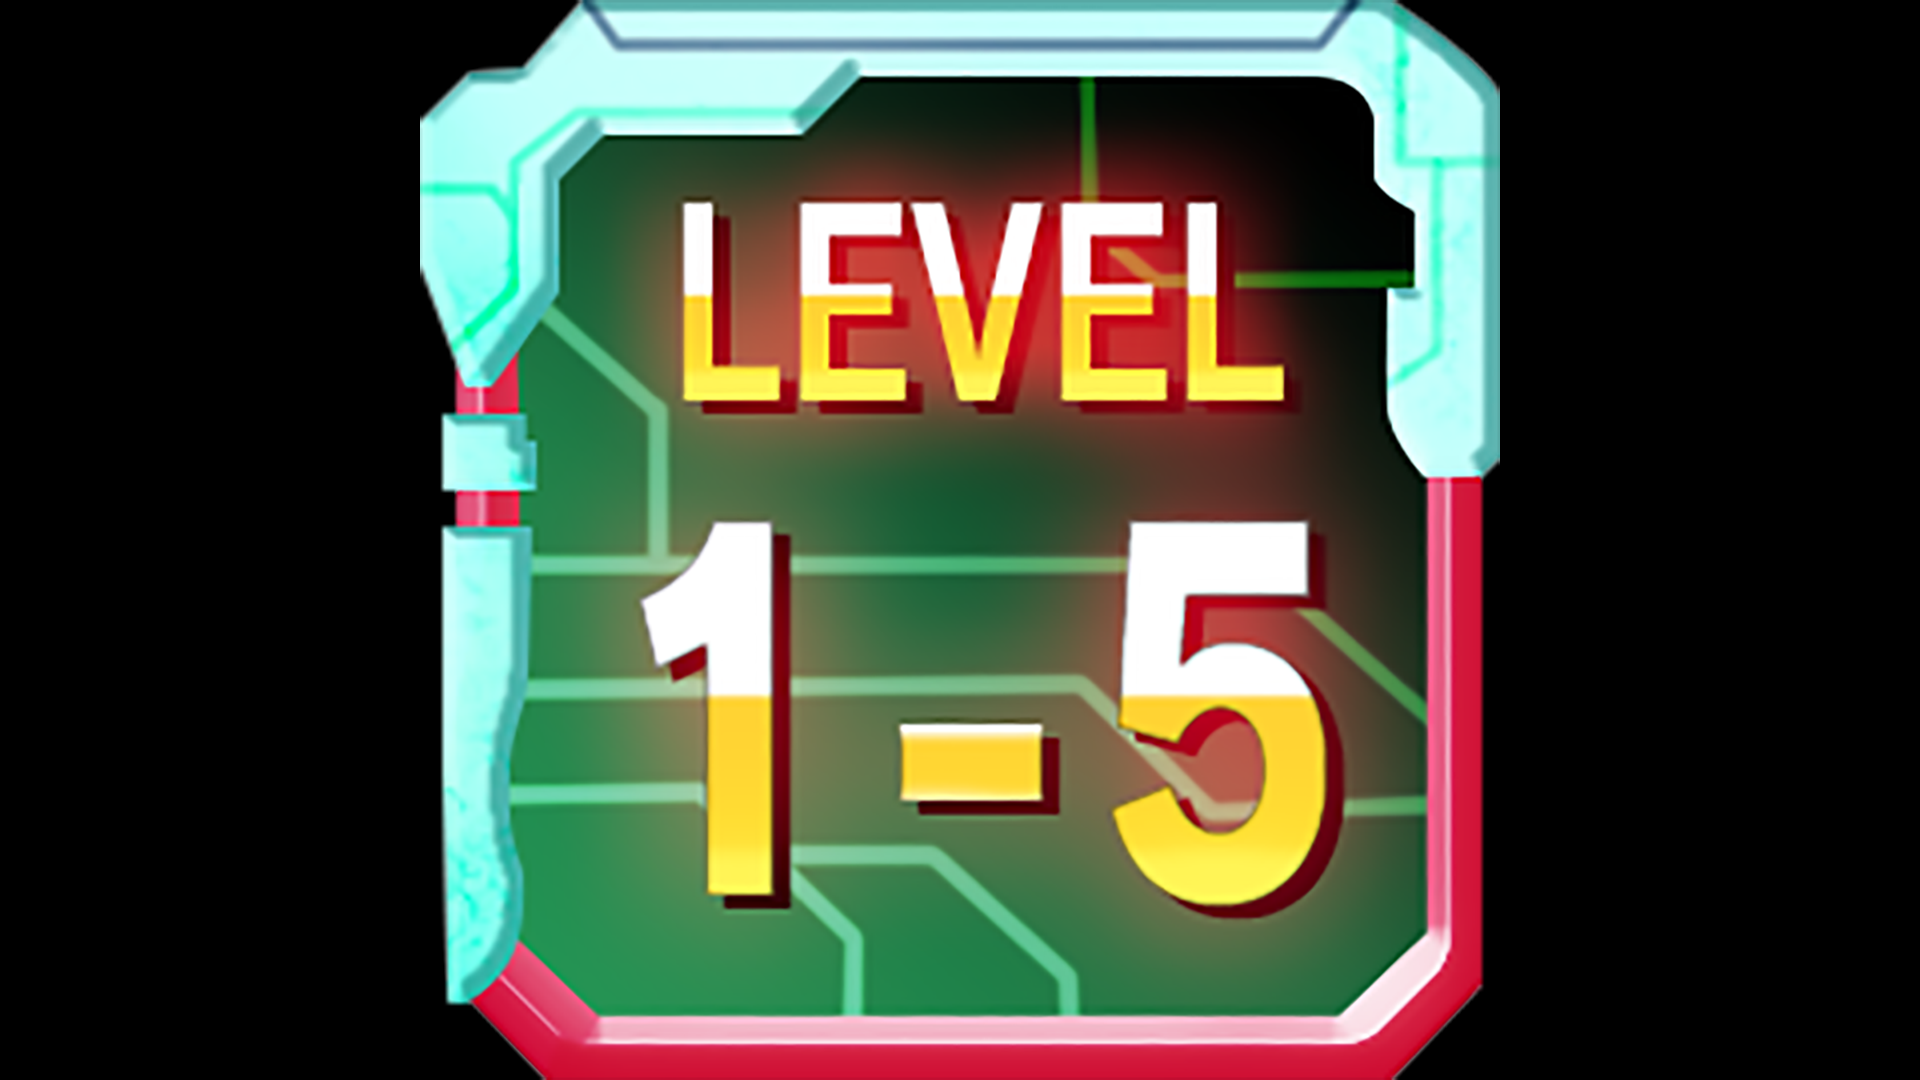 Icon for LEVEL 1-5 Boss Destroyed!